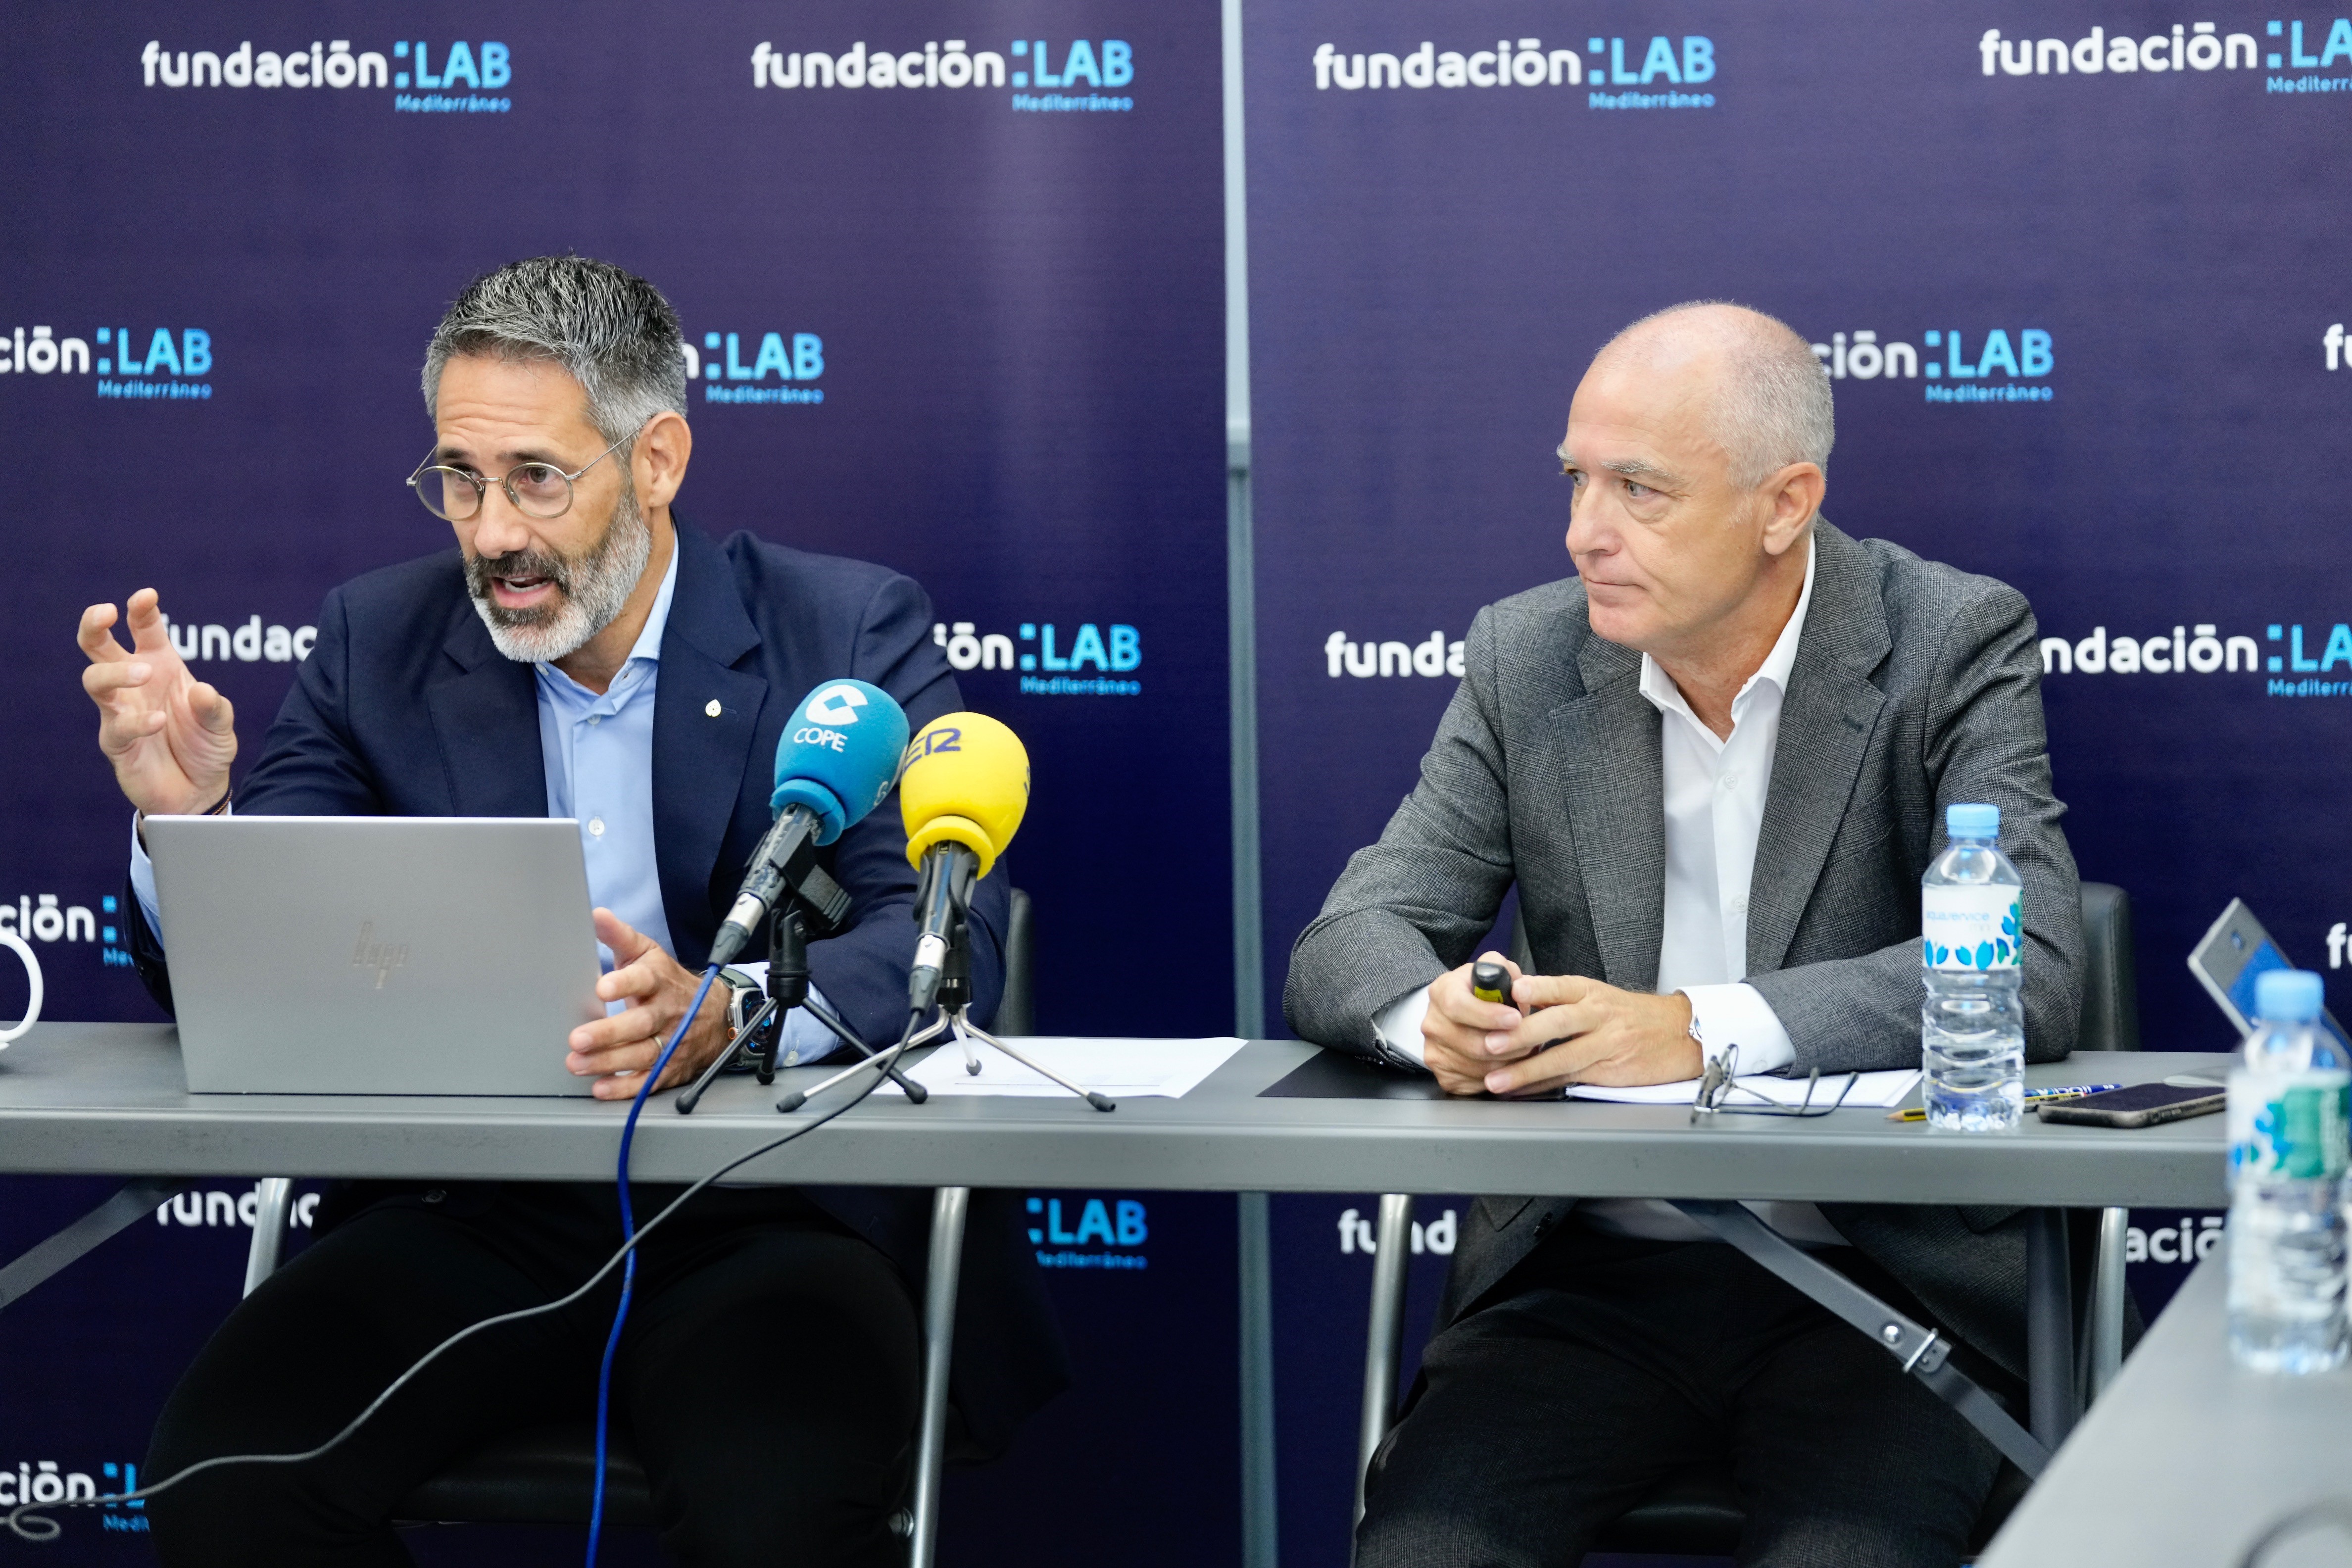 Fundación LAB Mediterráneo outlines its actions after 3 years of existence